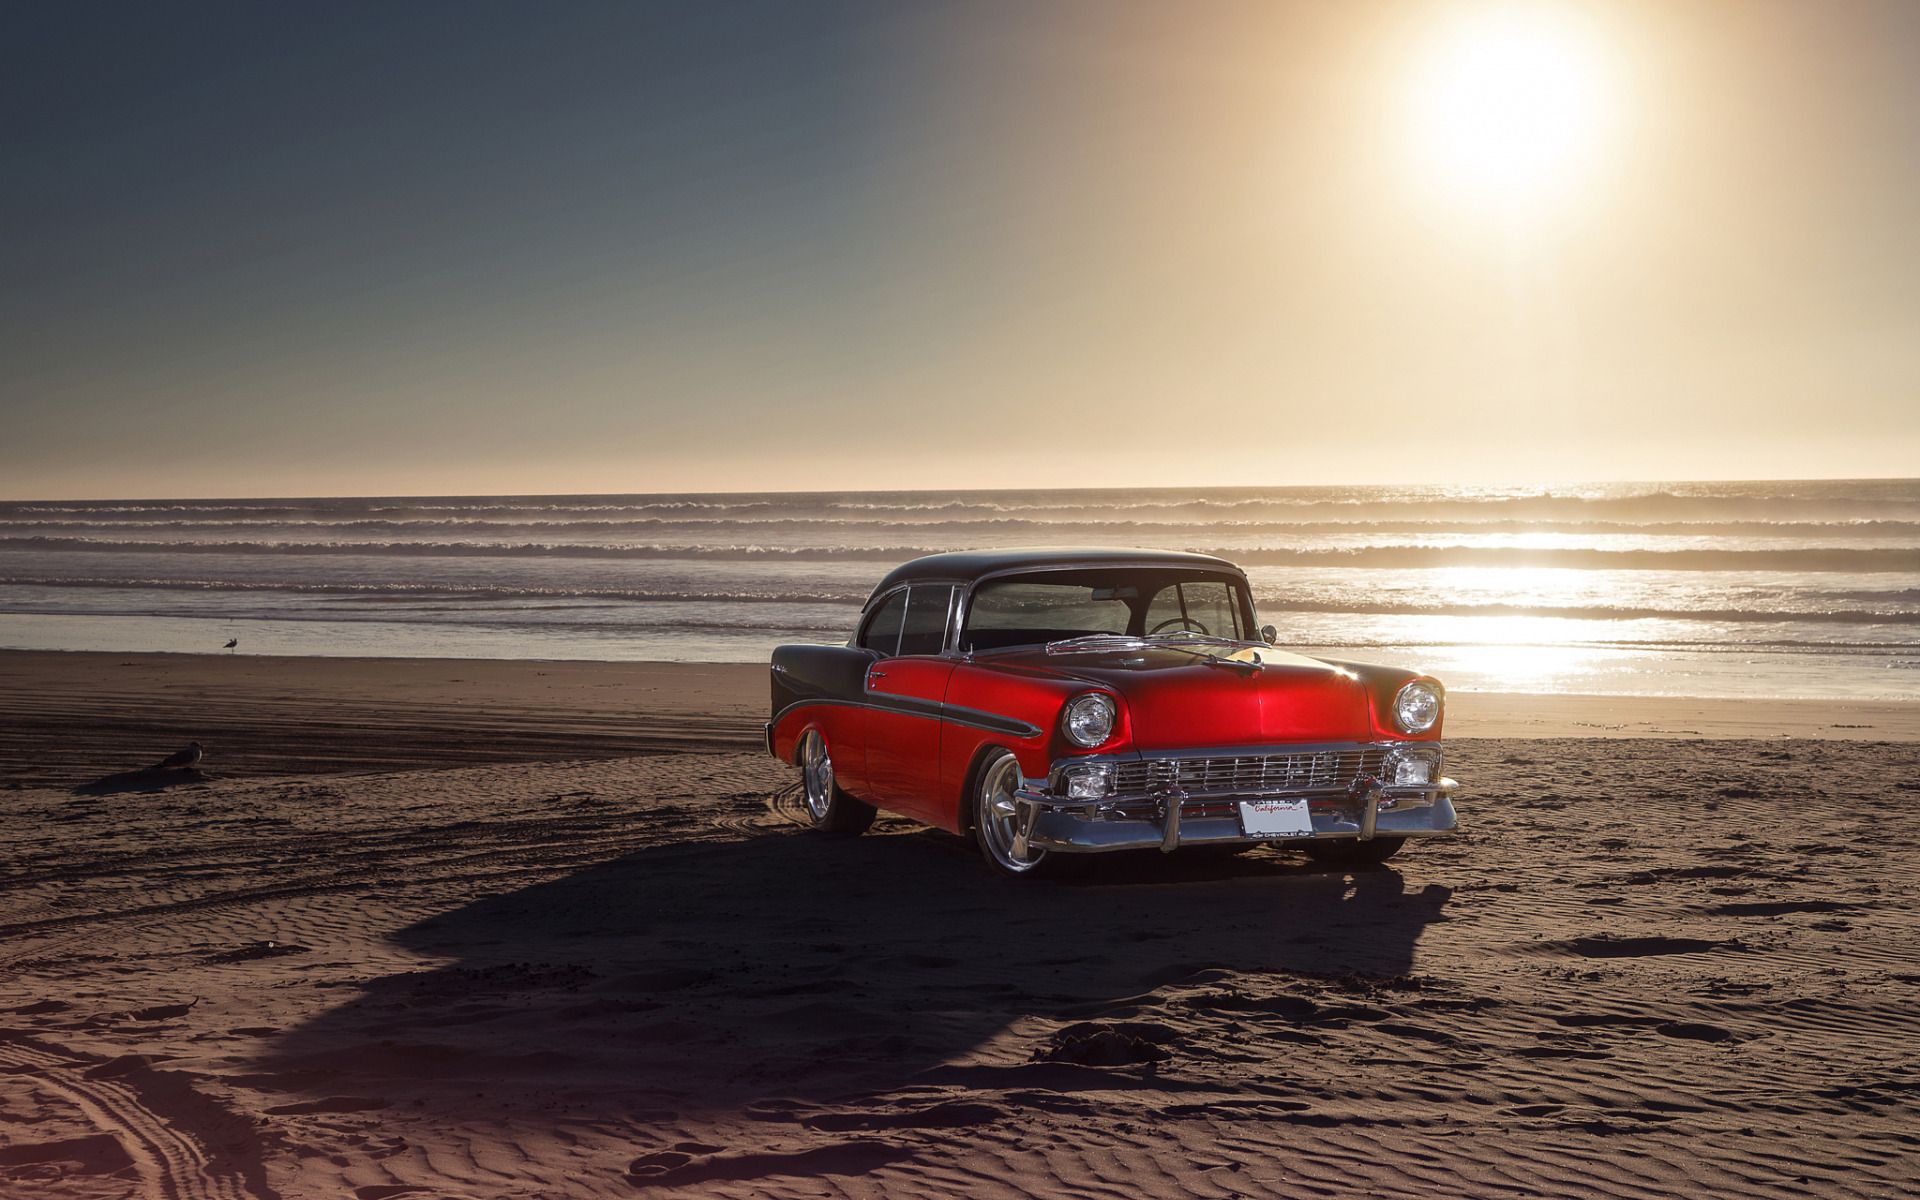 Download wallpaper Chevrolet Bel Air, red luxury coupe, retro cars, American vintage cars, car on the beach, ocean, sunset, Chevrolet for desktop with resolution 1920x1200. High Quality HD picture wallpaper